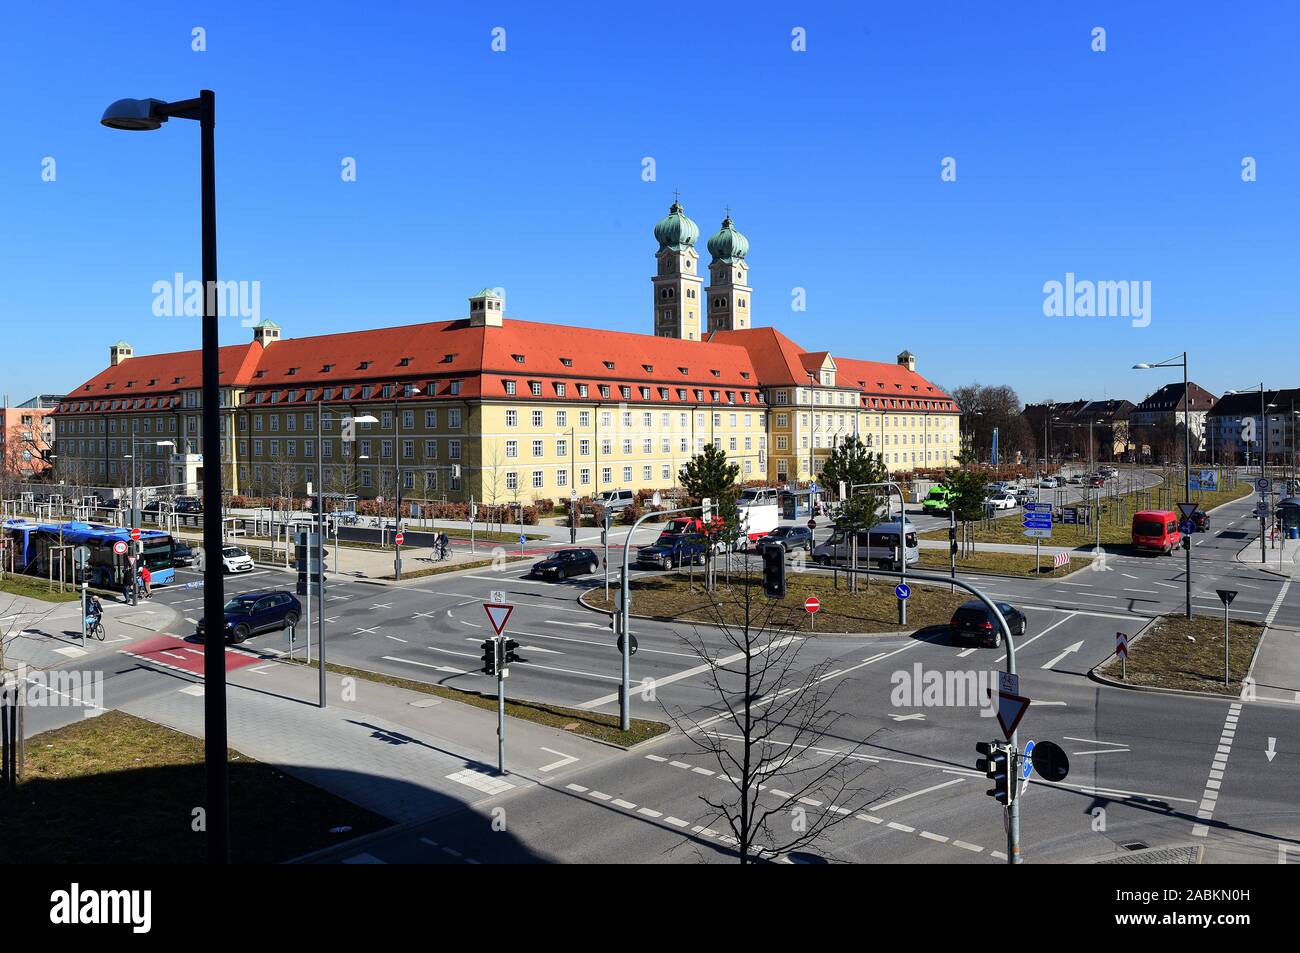 The Luise-Kiesselbach-Platz in Sendling-Westpark. In the background the building of Münchenstift gGmbH Haus St. Josef. [automated translation] Stock Photo